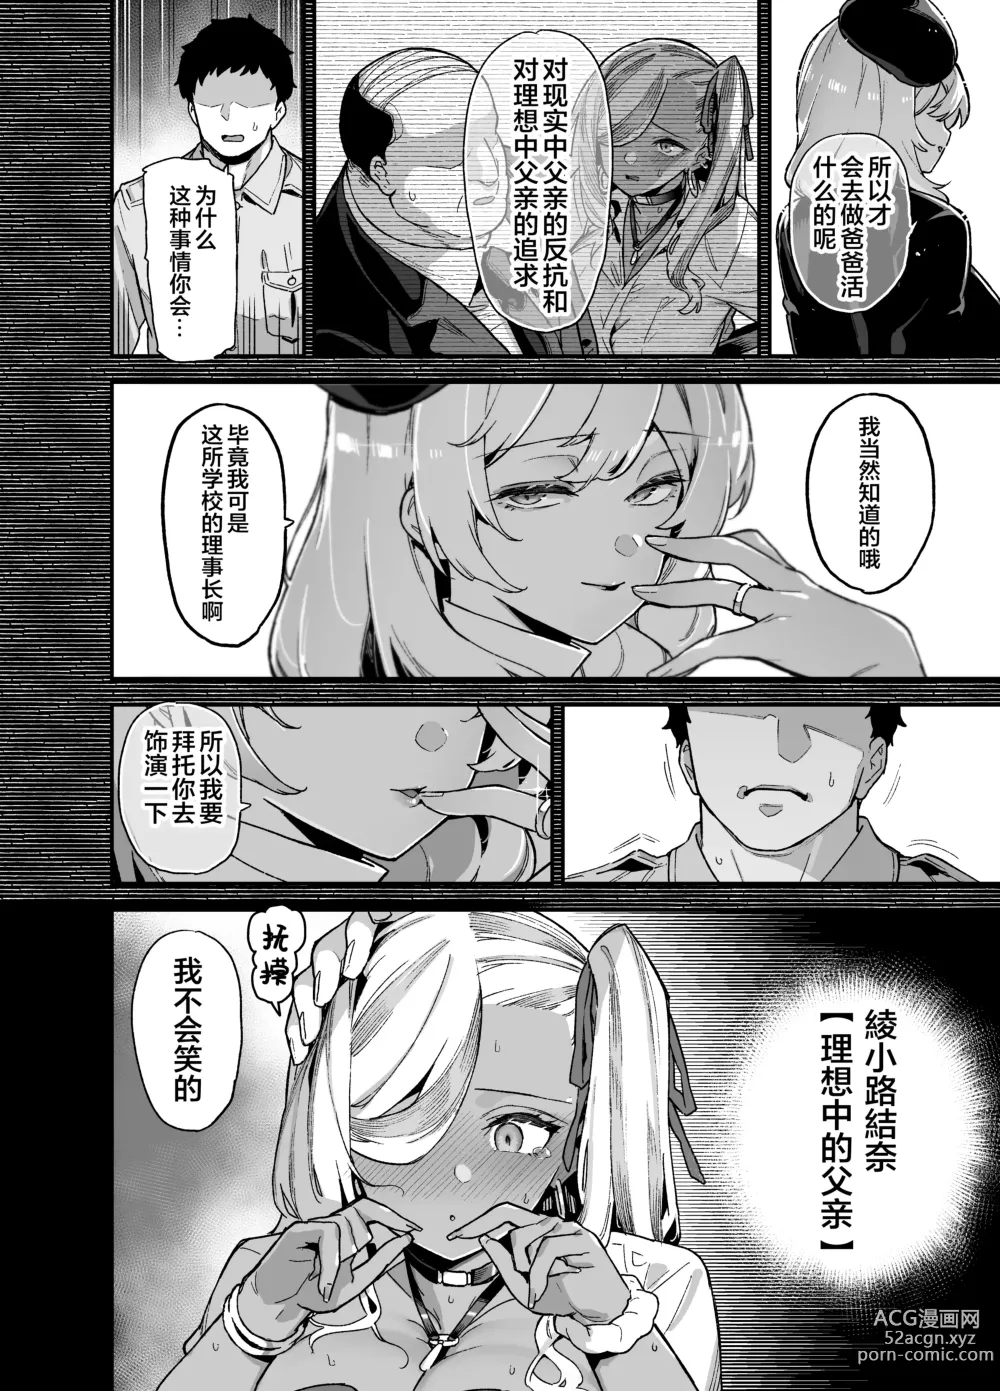 Page 11 of doujinshi 桜春女学院の男優2